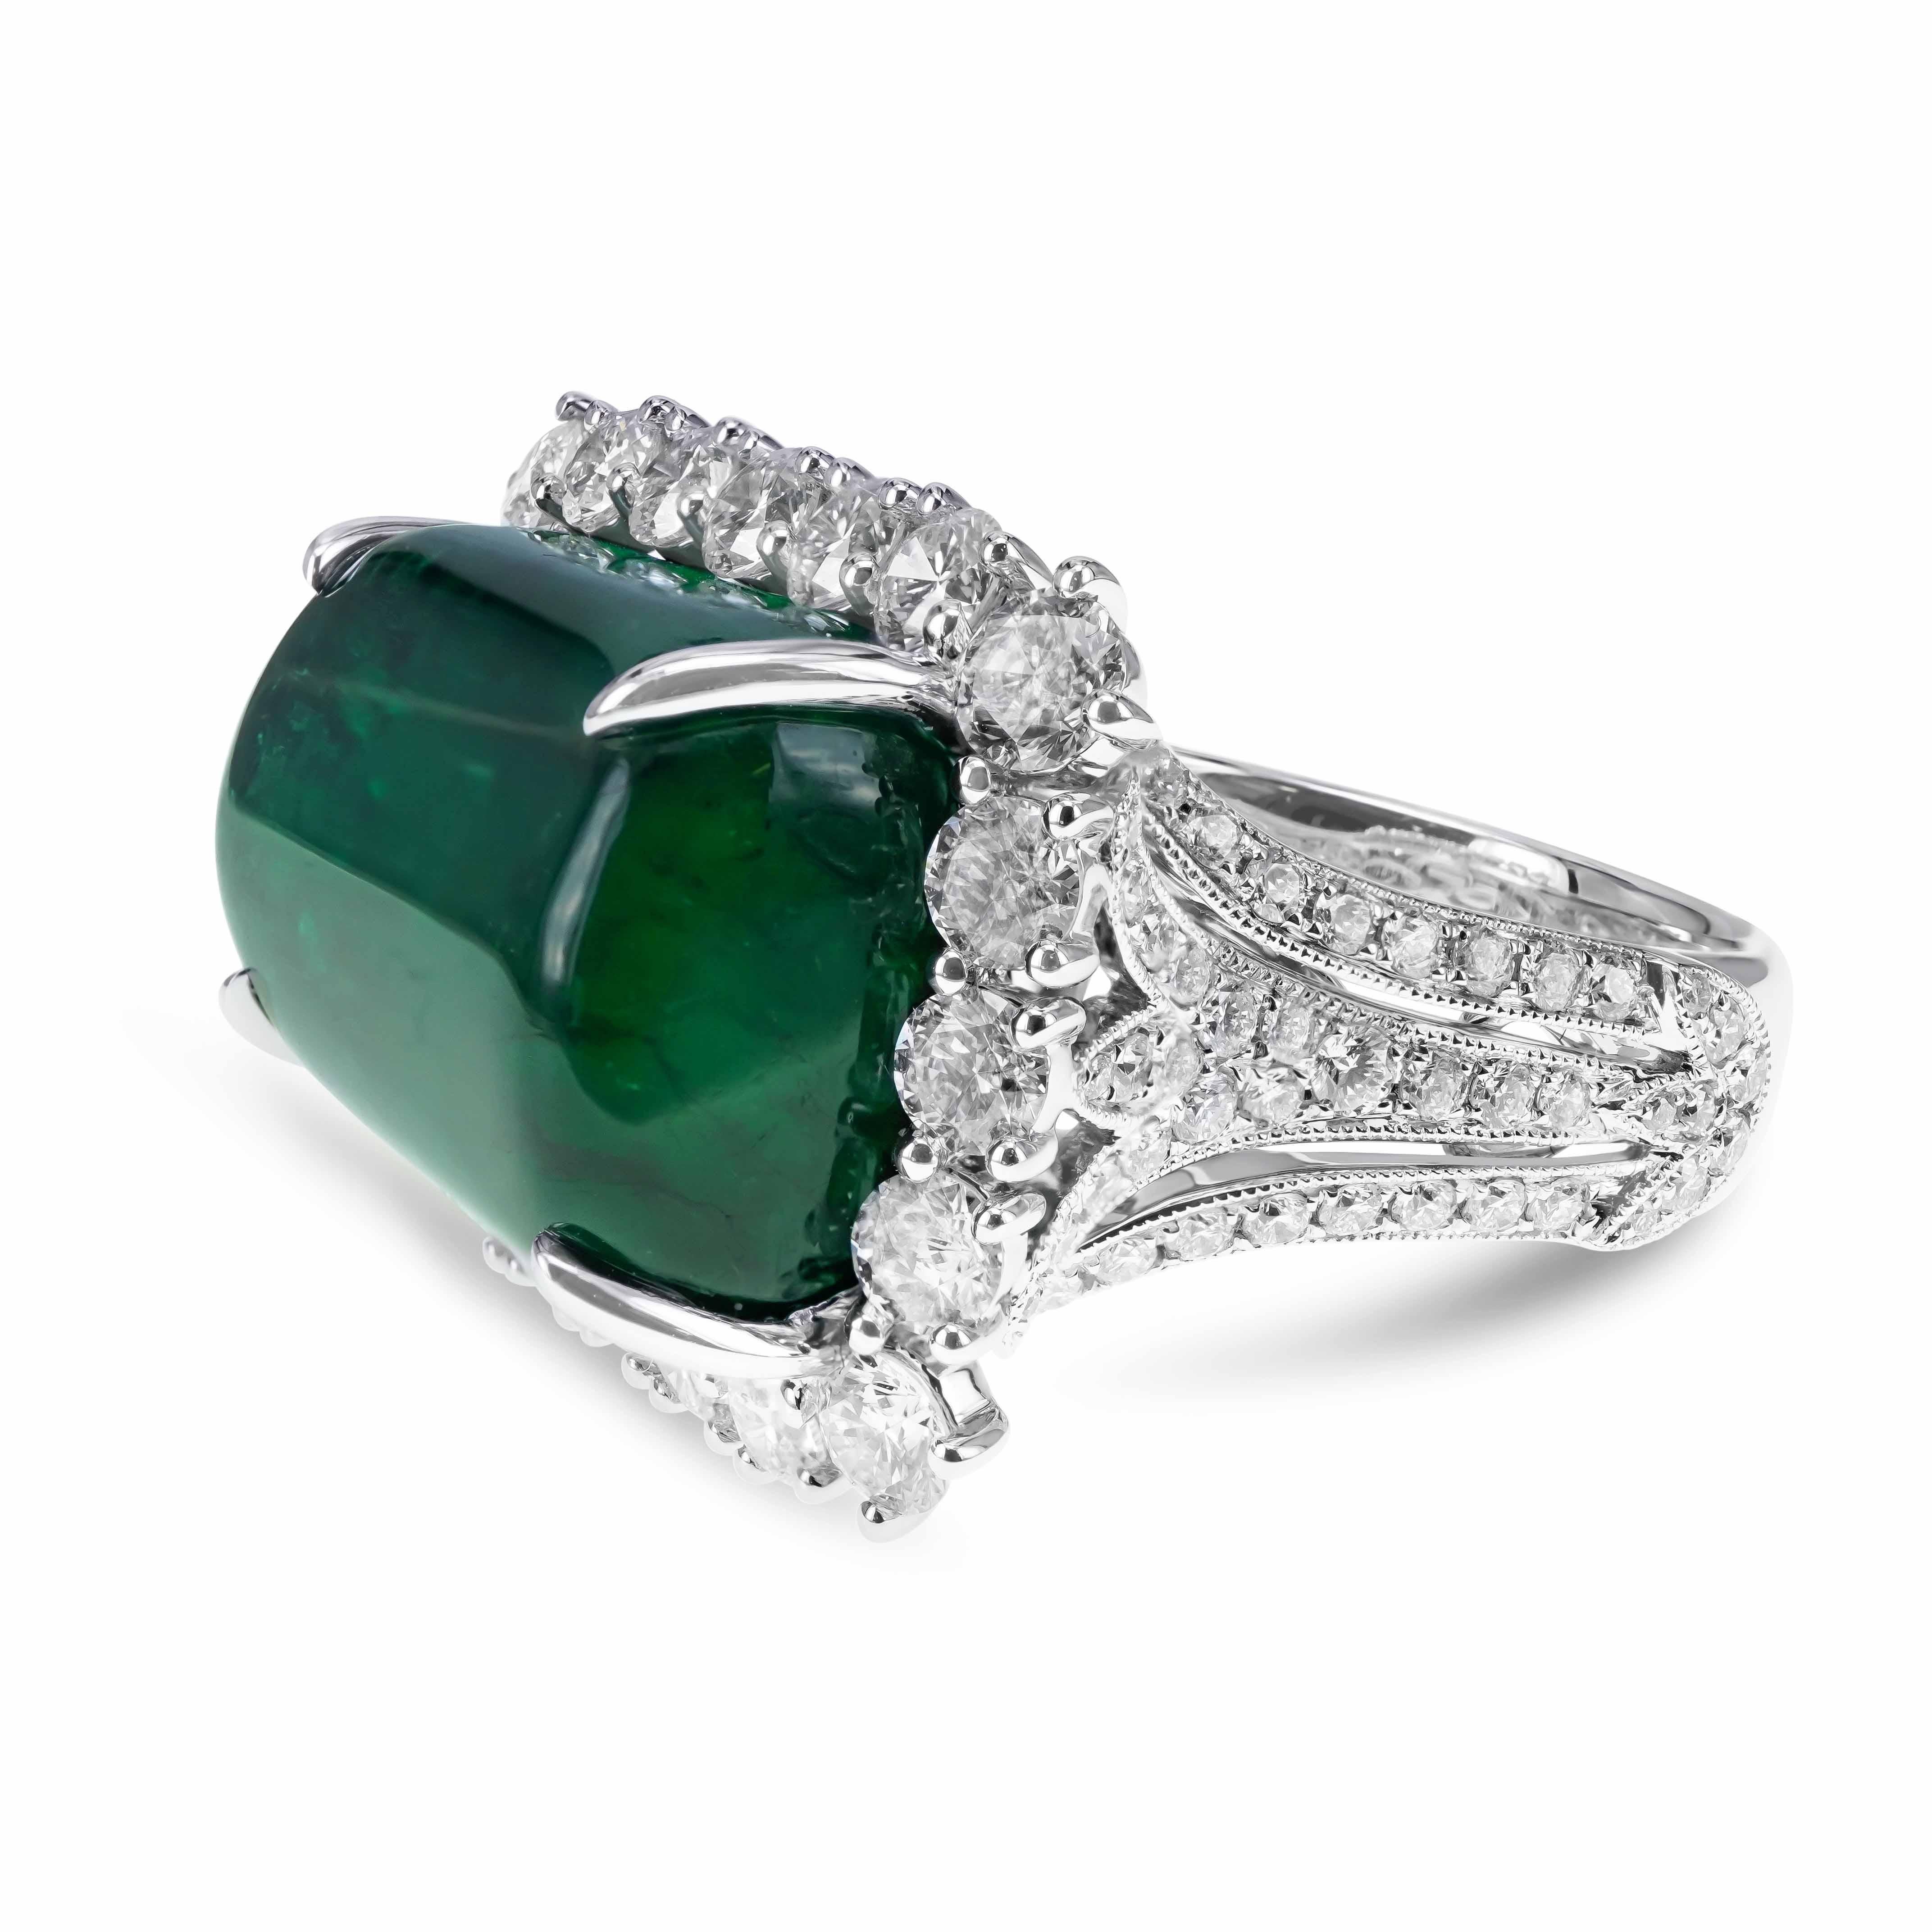 A 21.40 carat of vivid green tumble shaped emerald is set along with 2.63 carat of white brilliant round diamond. The ring has been in 18 K gold and is hand made in Hong Kong. The details of the diamonds are mentioned below:
Color: F
Clarity: Vs
The